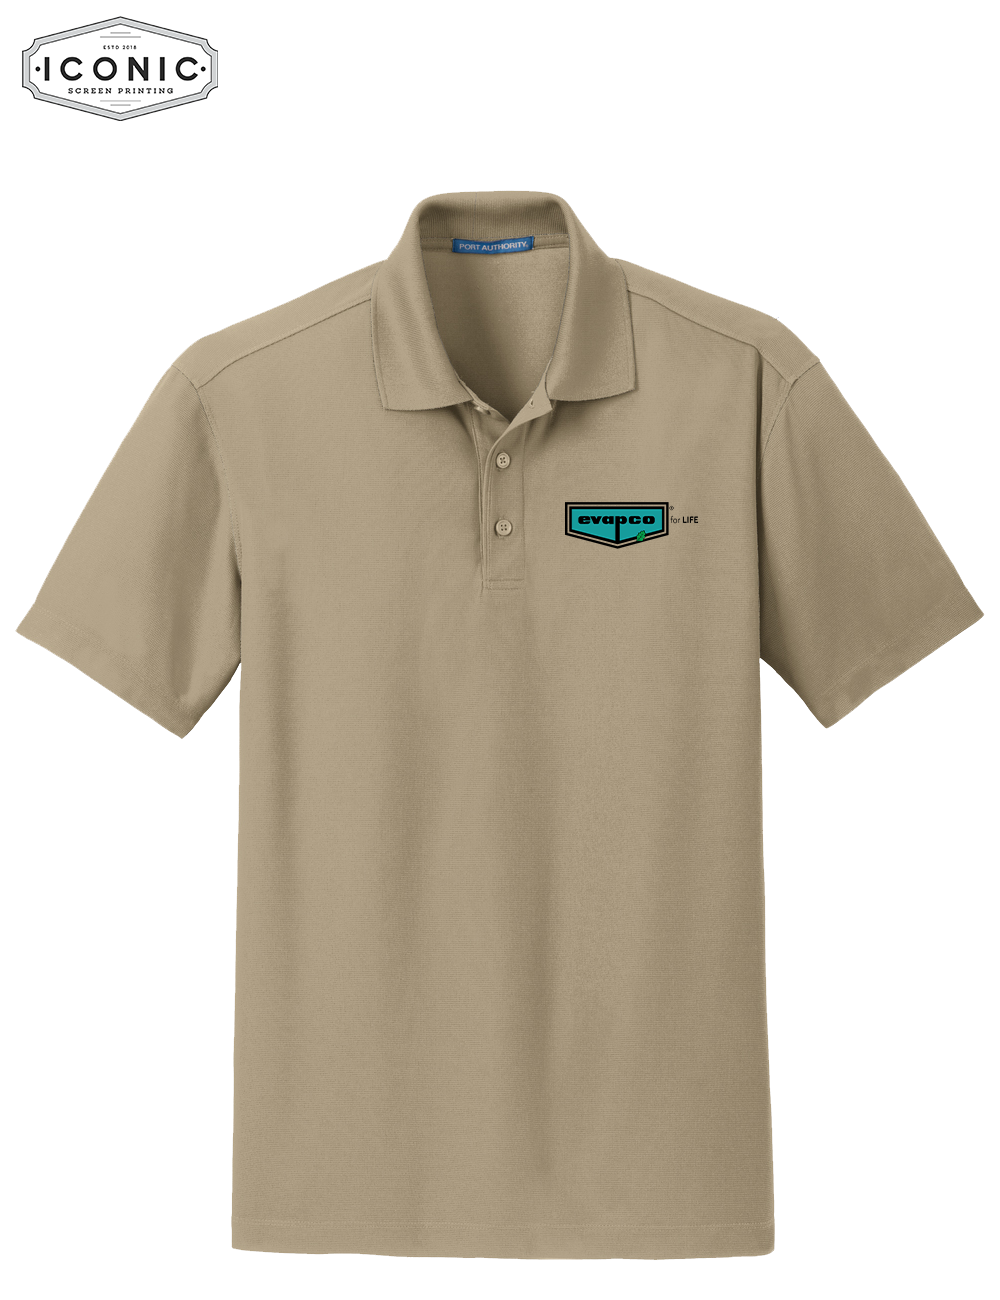 Evapco for Life - Dry Zone® Grid Polo - Select Mens or Womens Fit - Embroidery